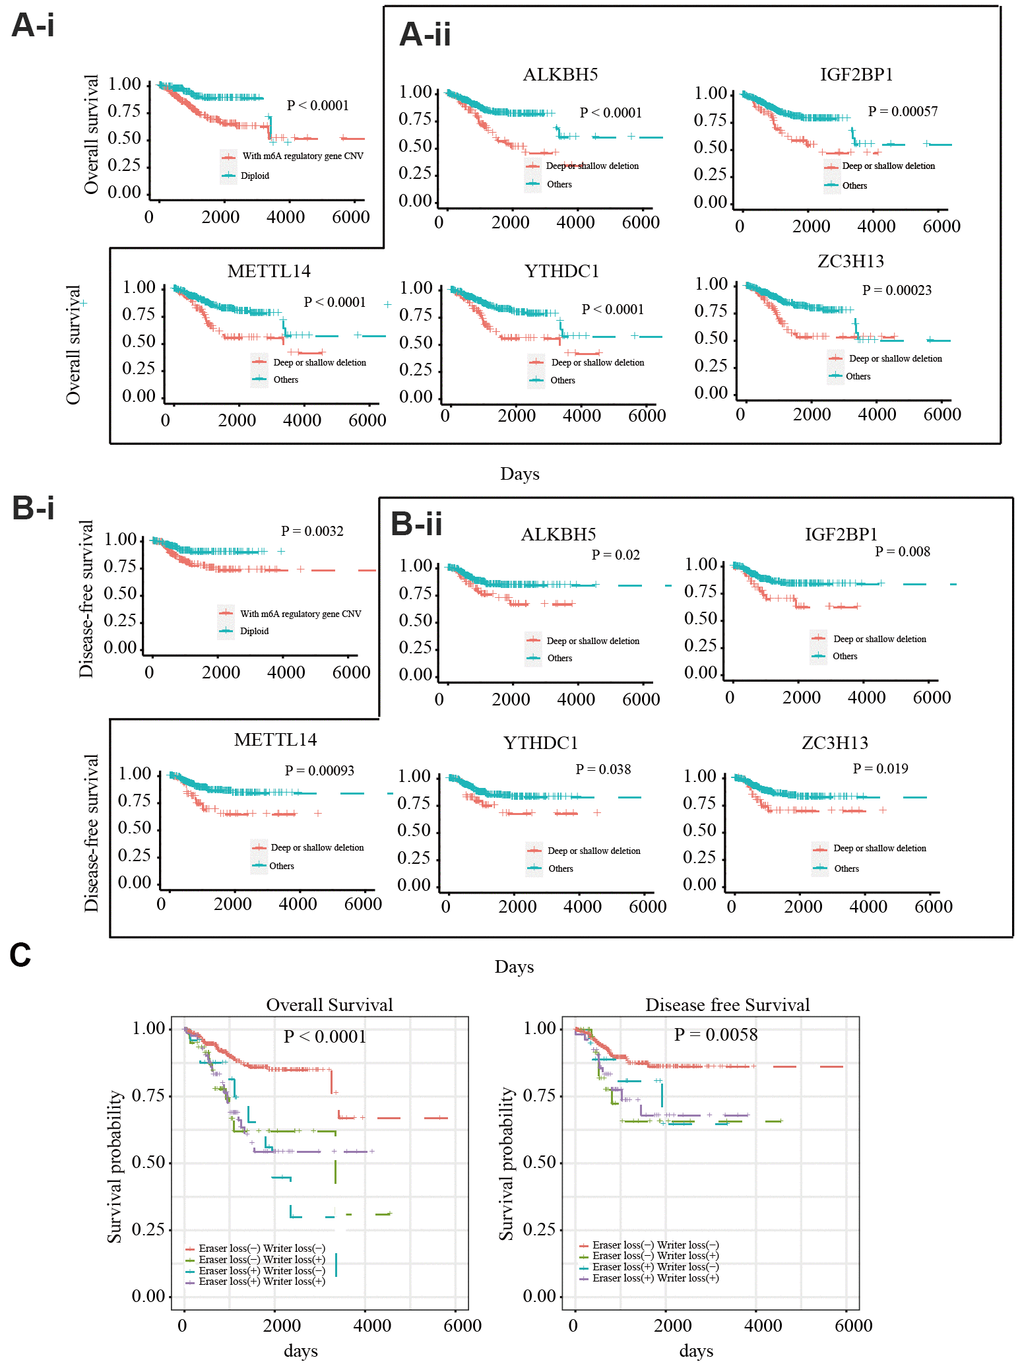 Relationship between copy number variants of m6A regulatory genes and OS/DFS in 412 EC patients (A-i) OS of EC patients with or without mutations in m6A regulatory genes. (A-ii) OS of EC patients with different CNV types for IGF2BP1, ZC3H13, METTL14, ALKBH5, and YTHDC1. (B-i) DFS of EC patients with or without mutations in m6A regulatory genes. (B-ii) DFS of EC patients with different CNV types for IGF2BP1, ZC3H13, METTL14, ALKBH5, and YTHDC1. (C) OS and DFS of EC patients with simultaneous alterations in writer and eraser genes.